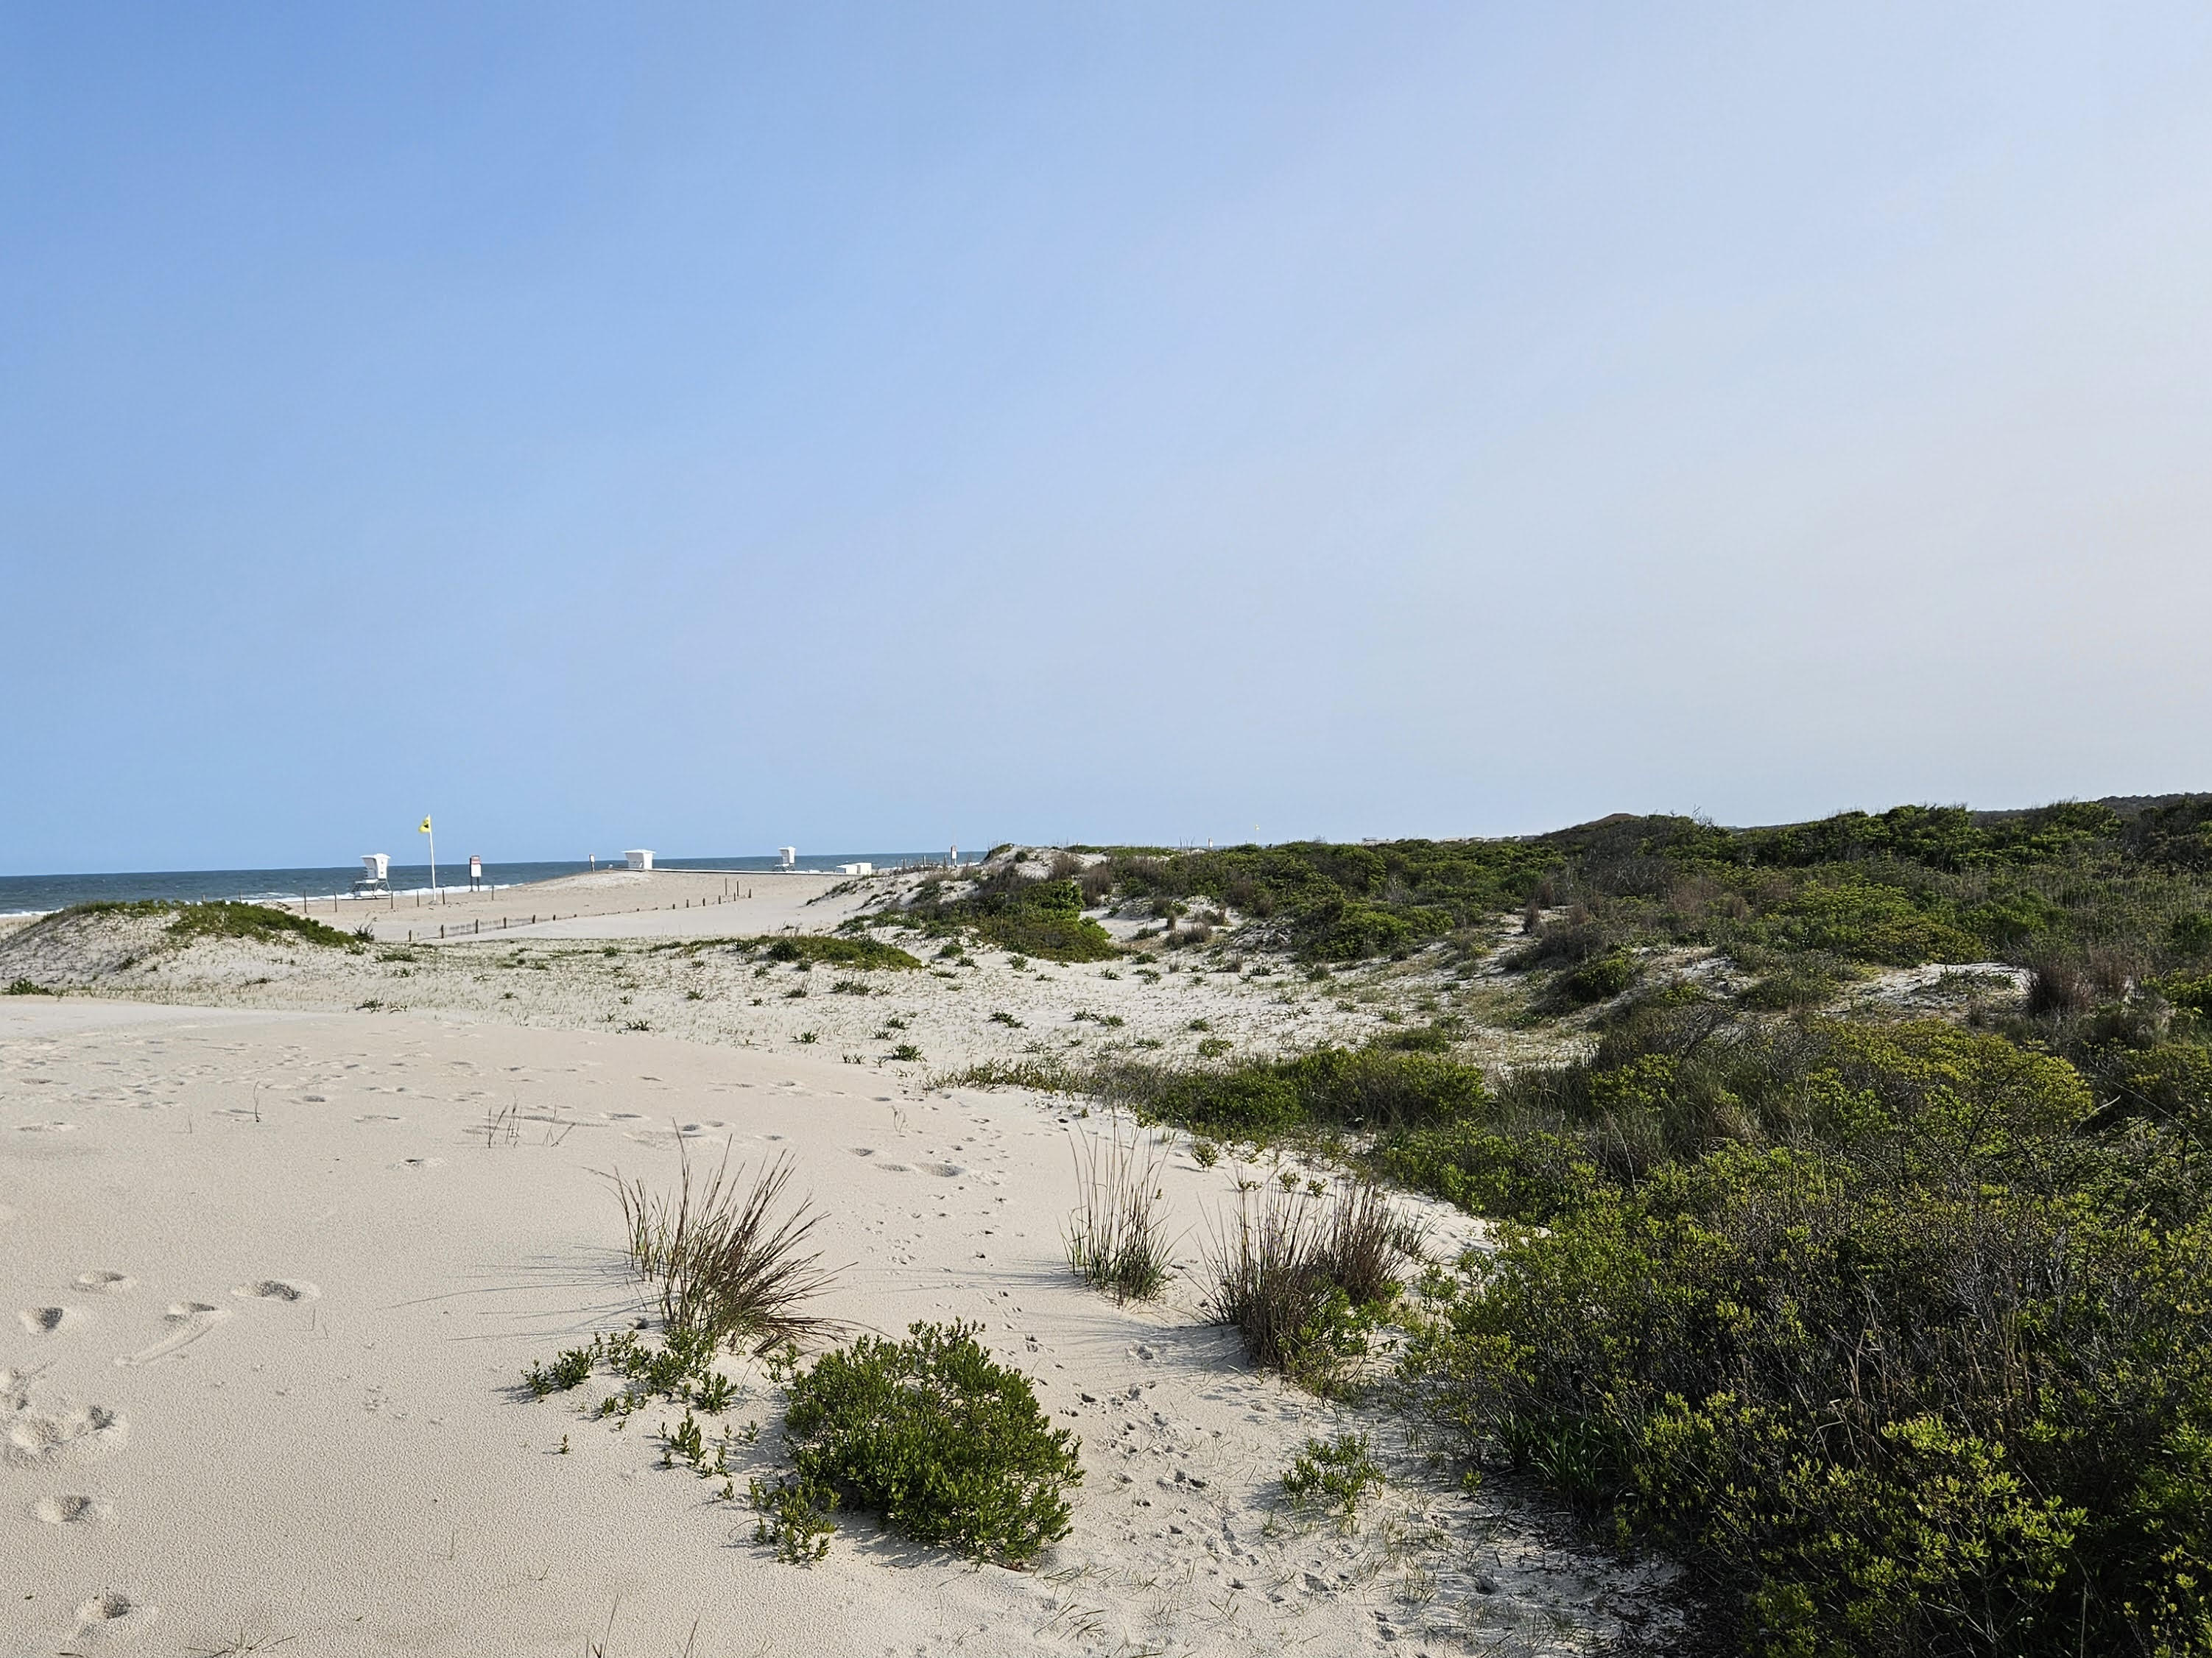 Pristine beach landscape of Assateague Island with sand dunes and native shrubbery under a clear blue sky. In the distance, lifeguard stands and a yellow flag can be seen, indicating beach activity areas.